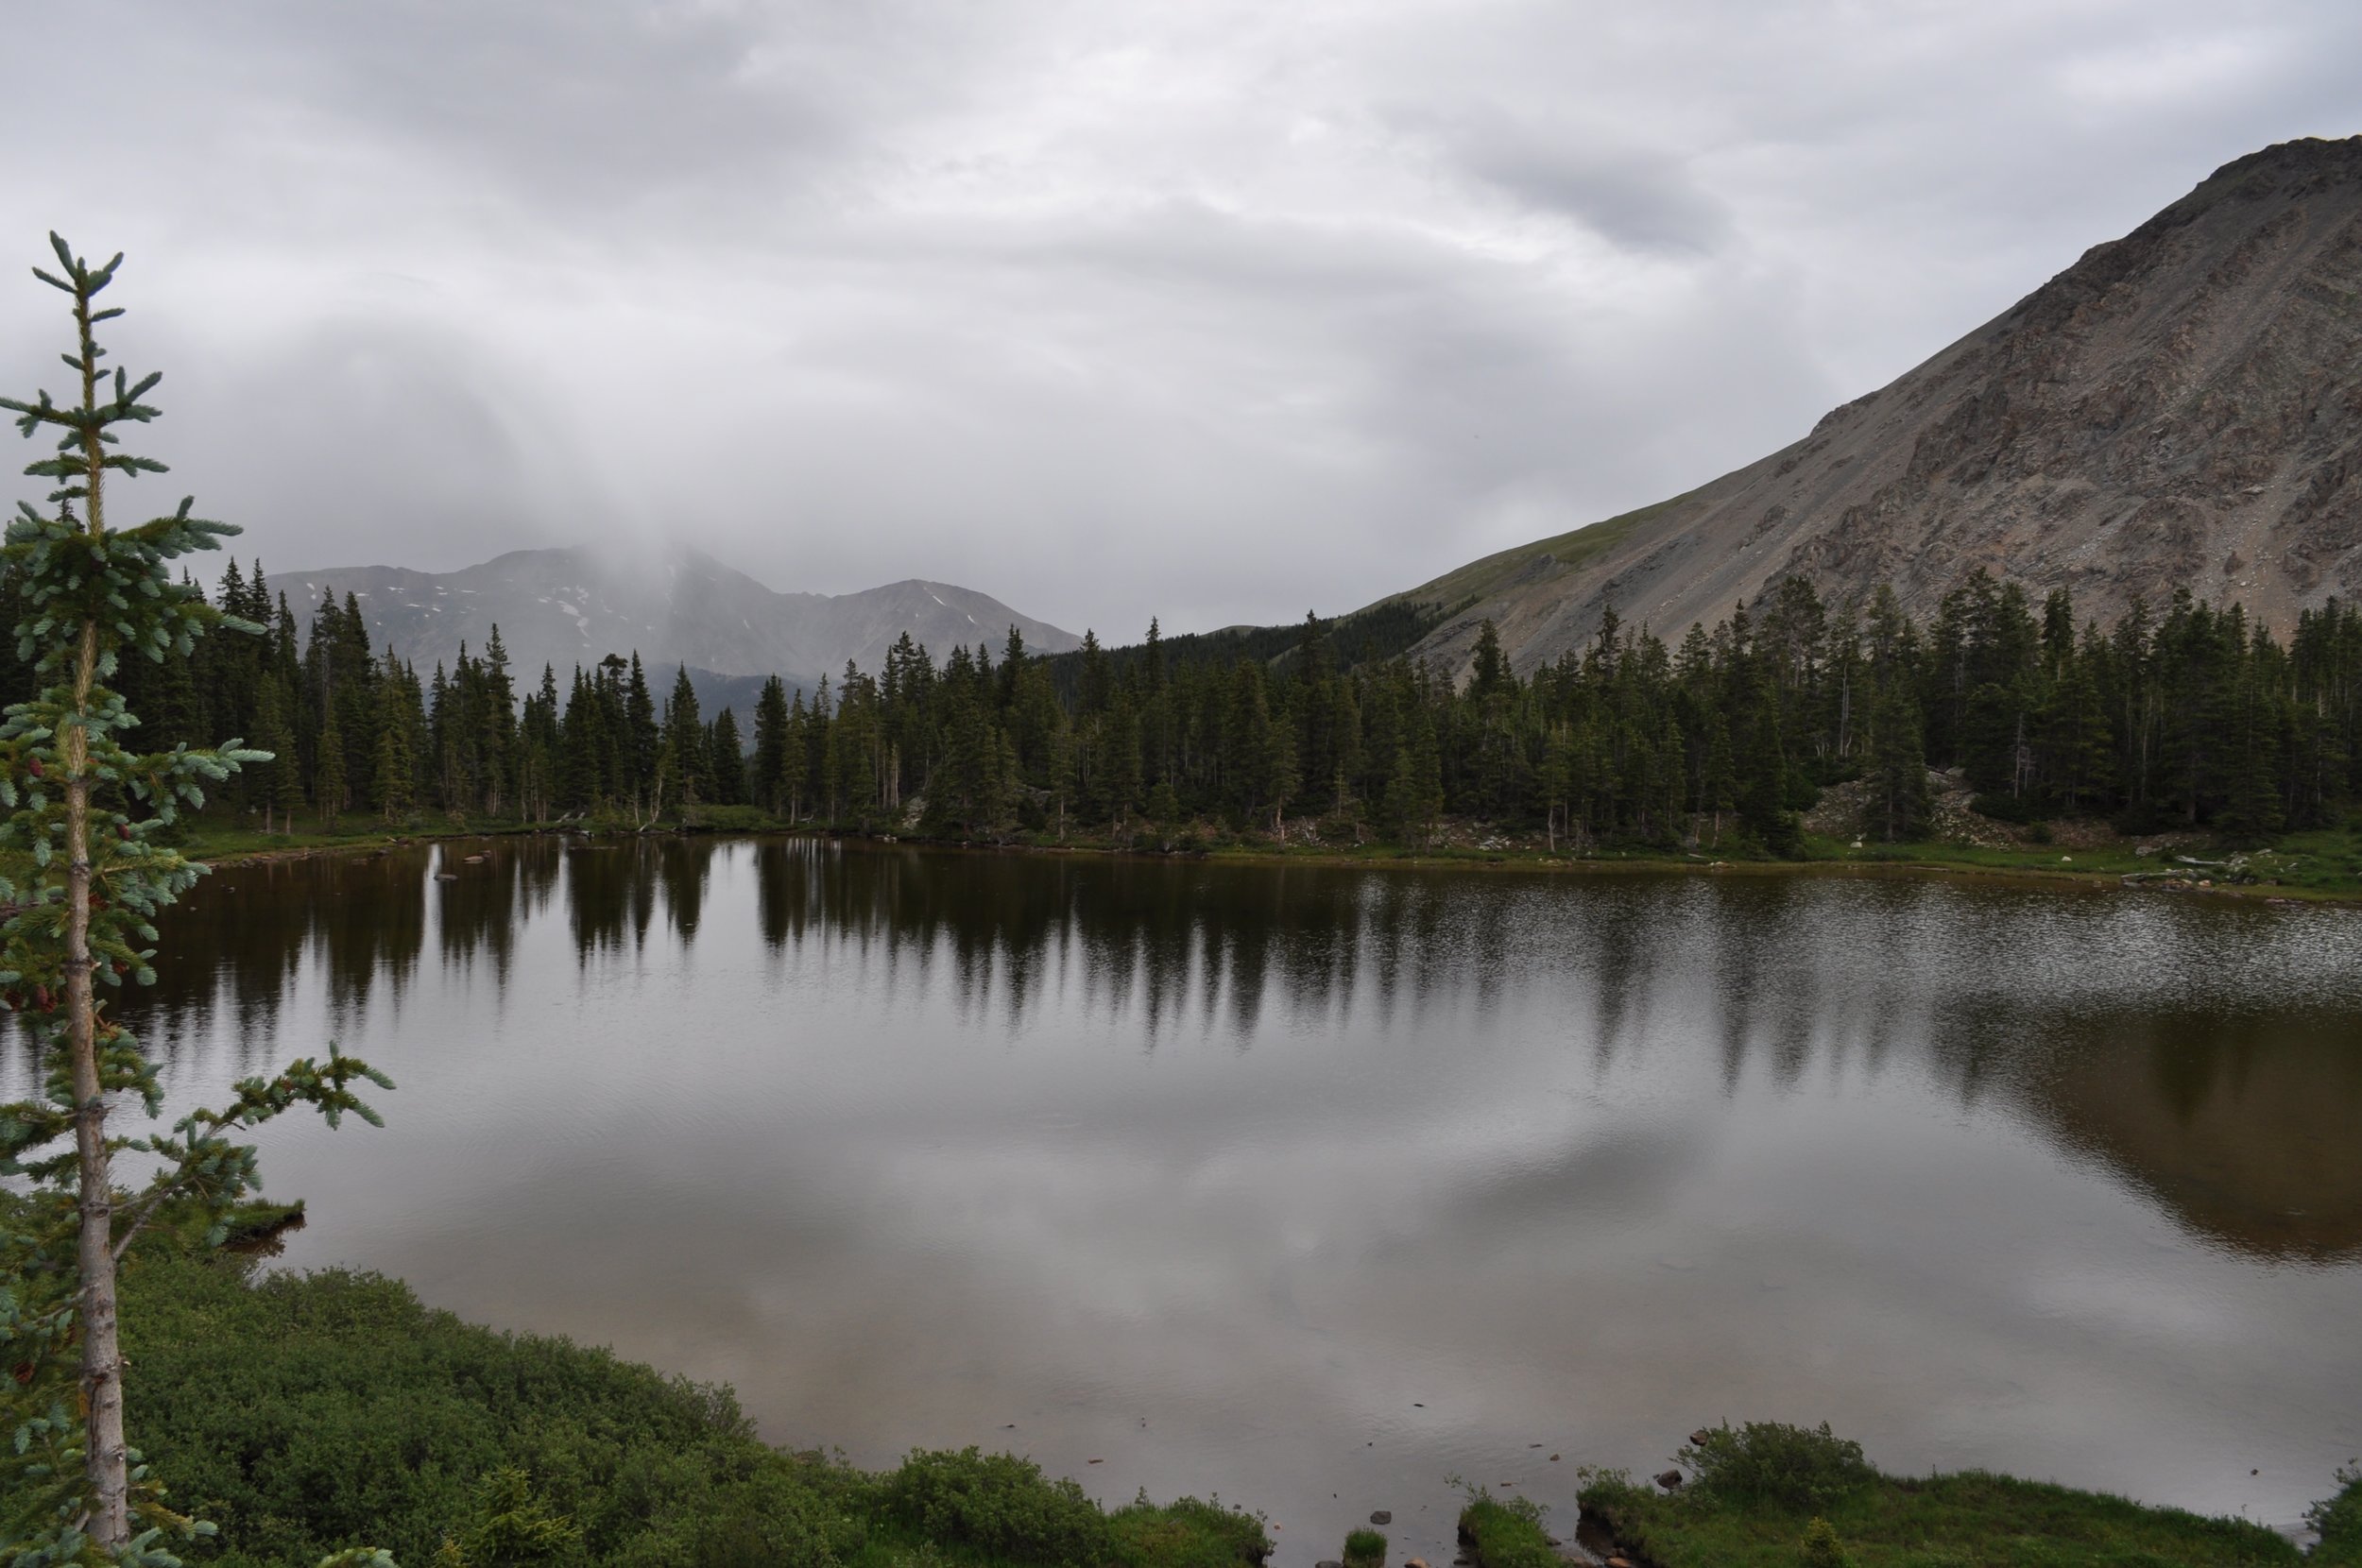  This is Ptarmigan Lake, an 8-mile hike in Buena Vista, Colo.&nbsp; 